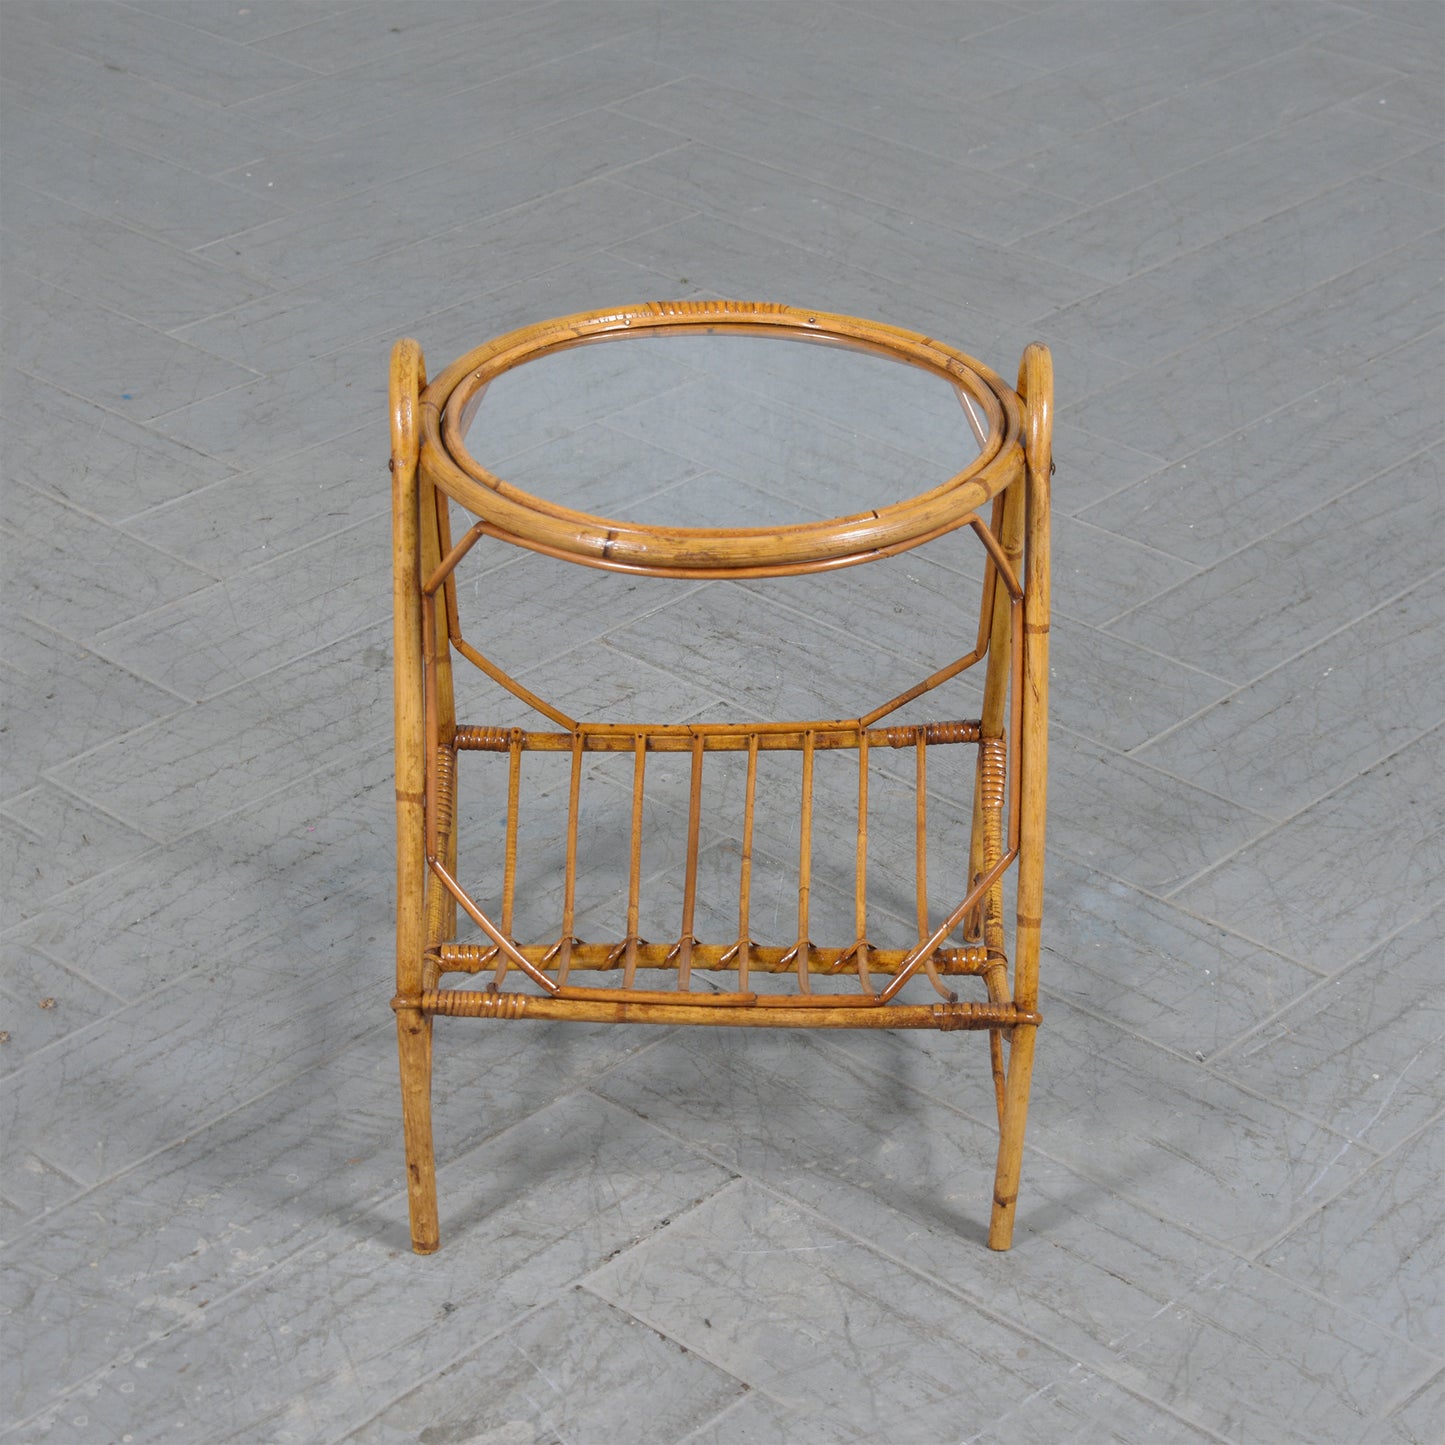 1960s Vintage Bamboo Side Table with Magazine Rack - Timeless Elegance